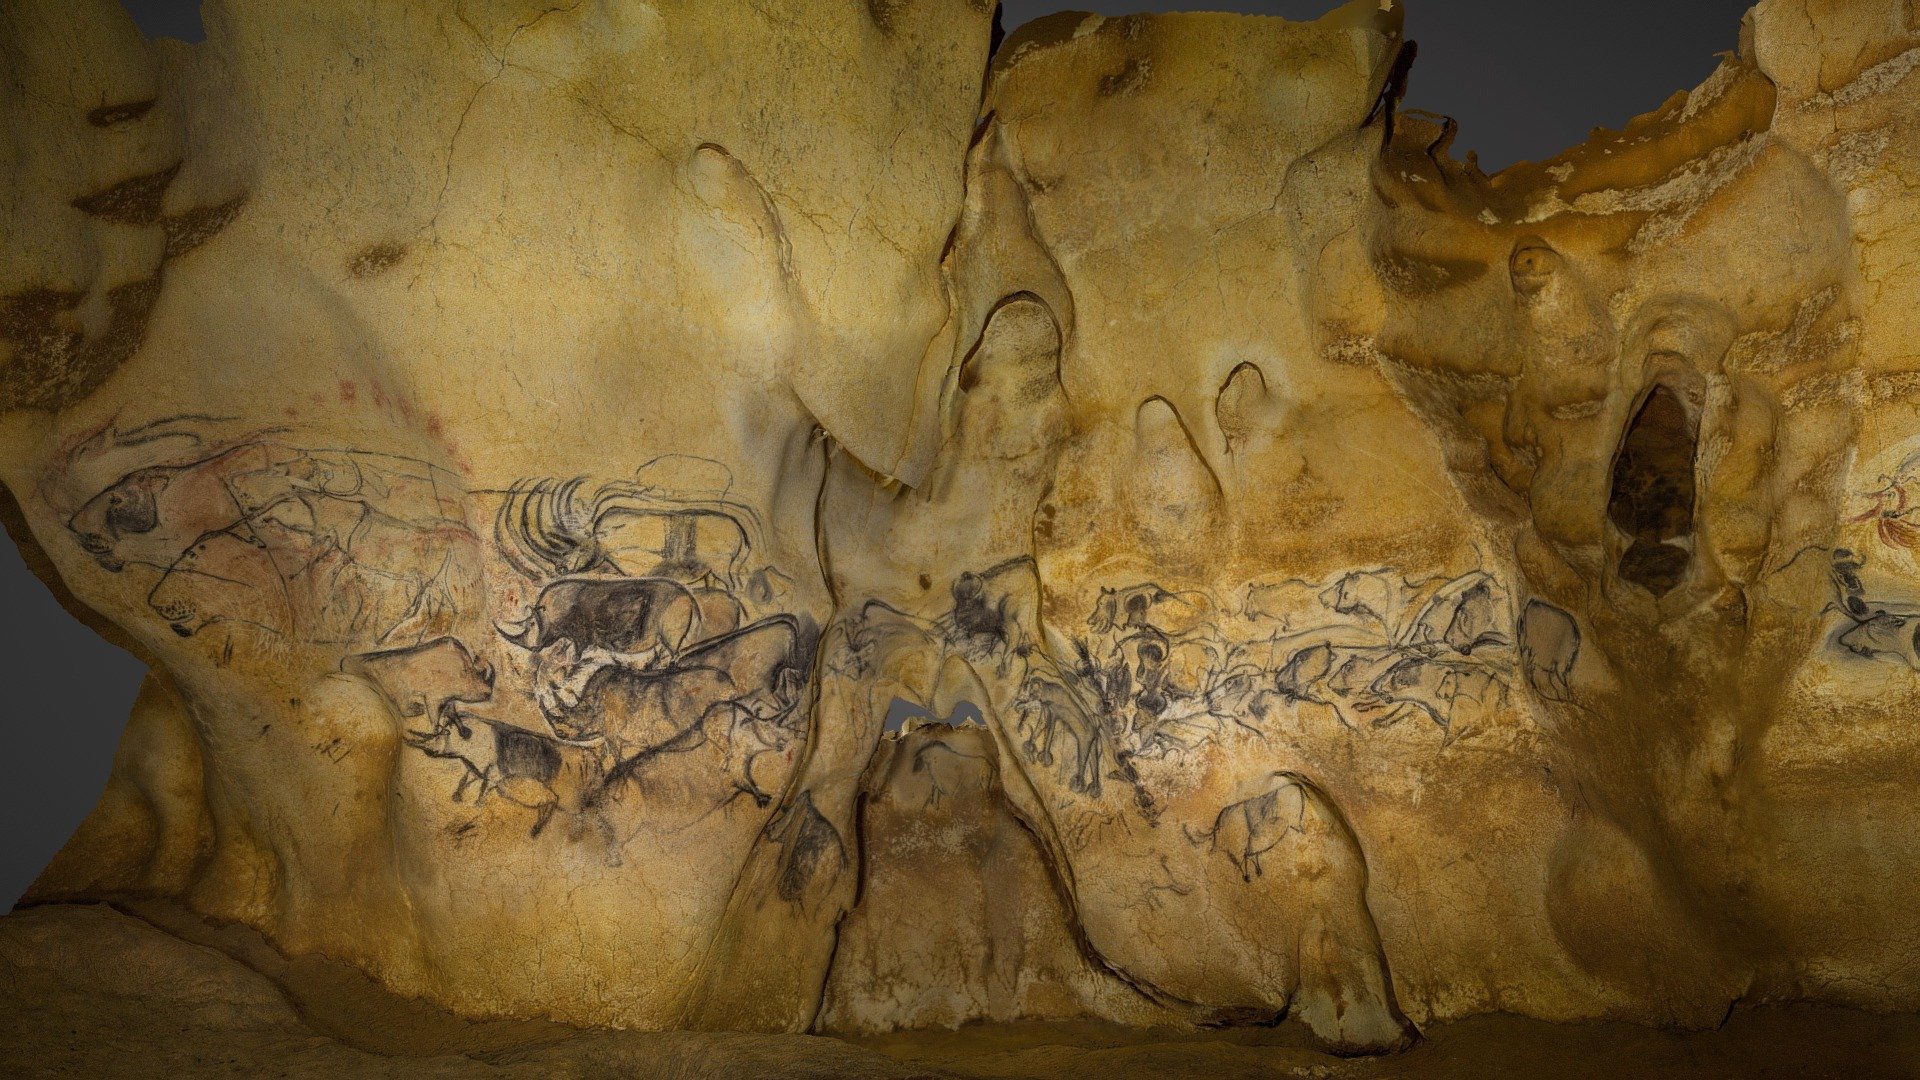 The Lion Panel is located in the lowest level of Chauvet Cave. Theses paleolithic paintings are among the best preserved and most spectacular of the ancient world. Dates for the Chauvet paintings hover around 36,000 years BP. 
The images for this model were originally shot for my National Geographic Magazine article on the first artists (here)
Read more about the discovery of Chauvel here - The Lion Panel of Chauvet, France - 3D model by Ancient Art Archive (@ancientartarchive) 3d model